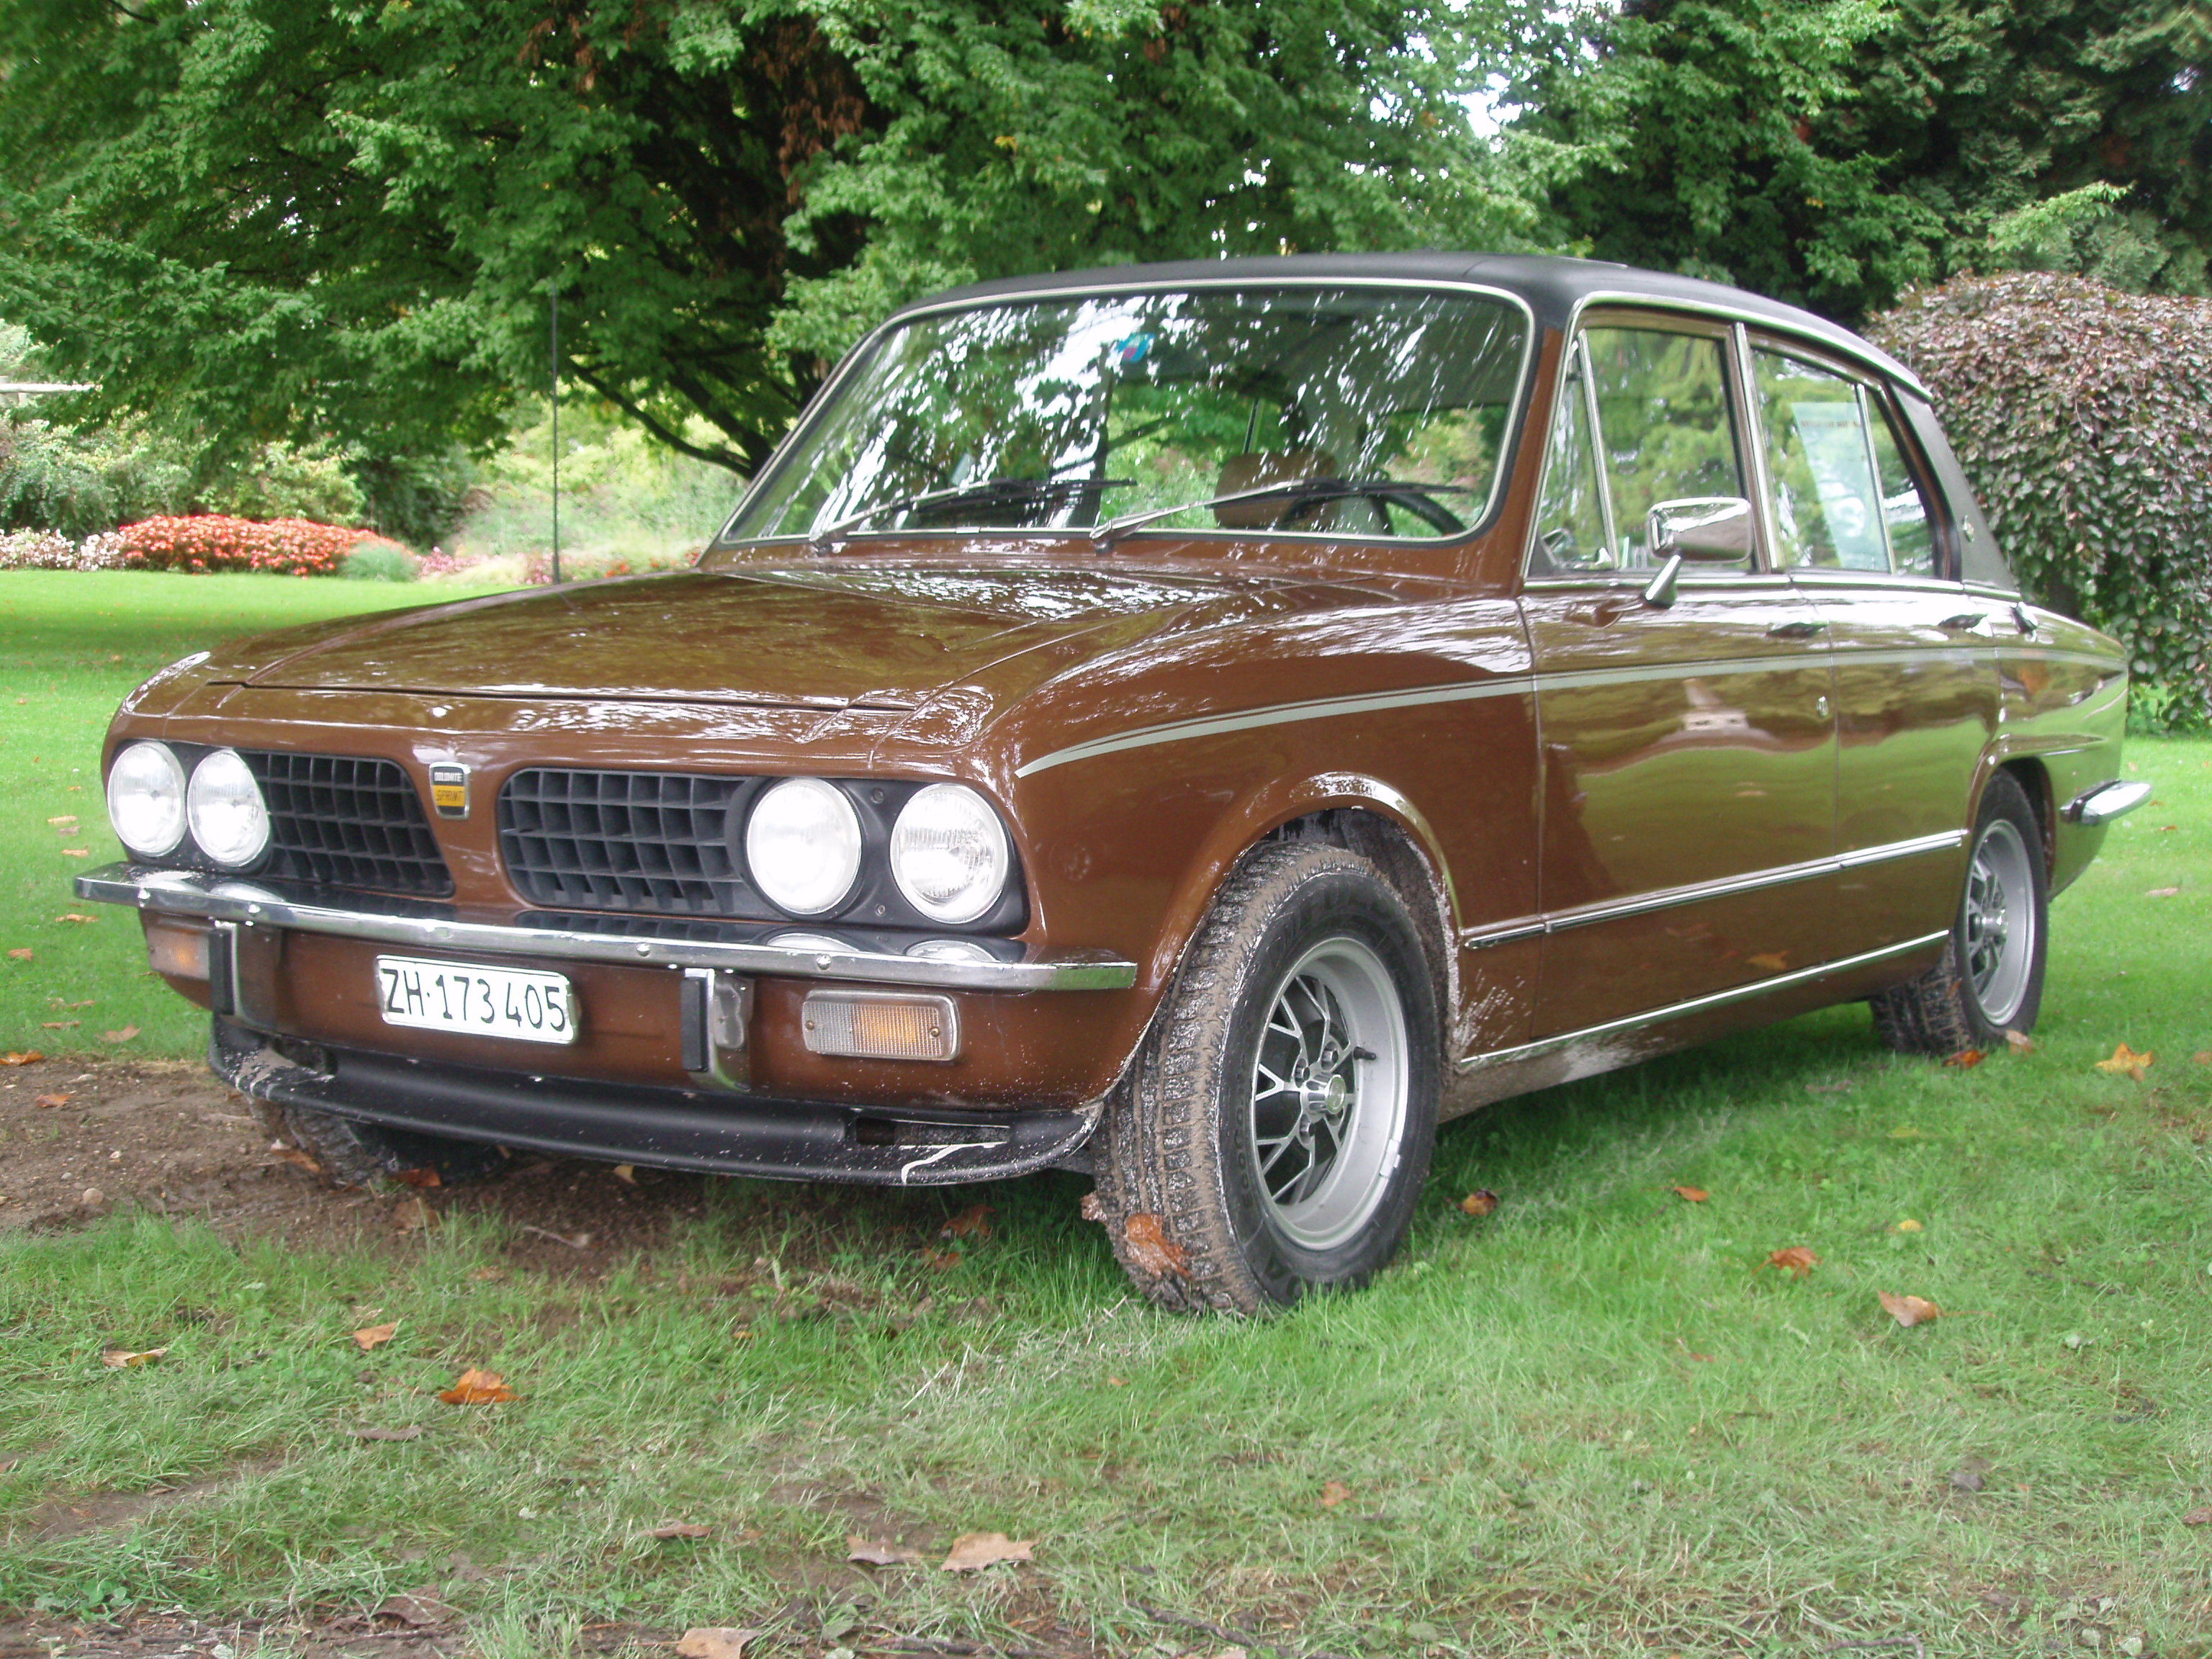 File:1978 Russet Brown Triumph Dolomite Sprint 2013 - Front left - Wikimedia Commons